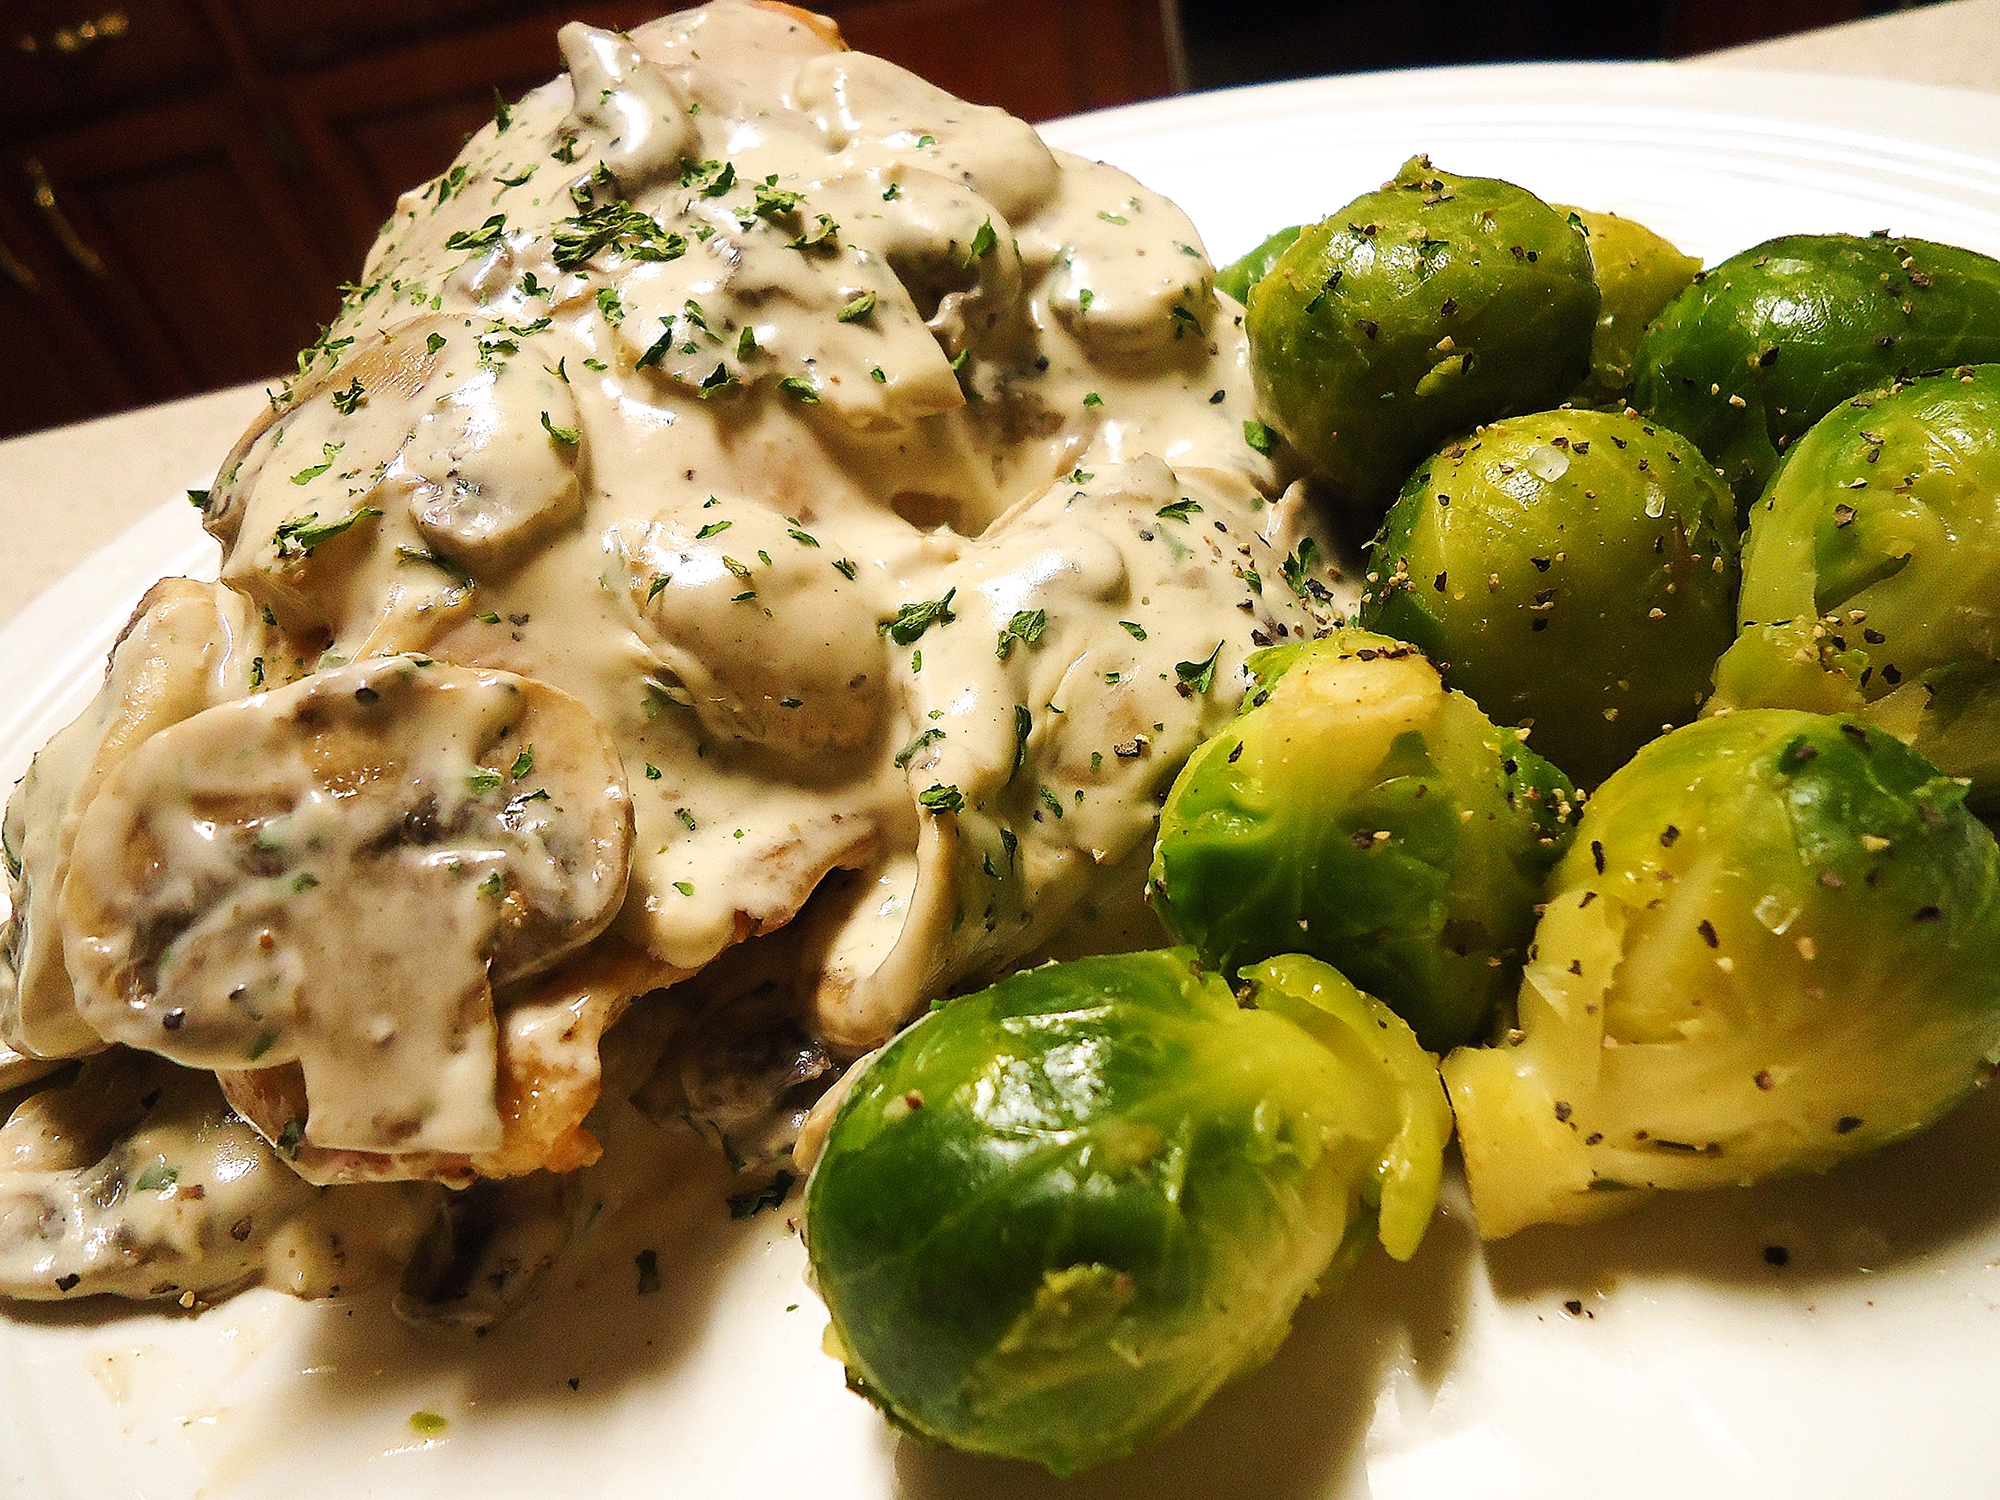 close up view of Mushroom and Swiss Chicken garnished with dry herbs, served with Brussels sprouts, on a white plate